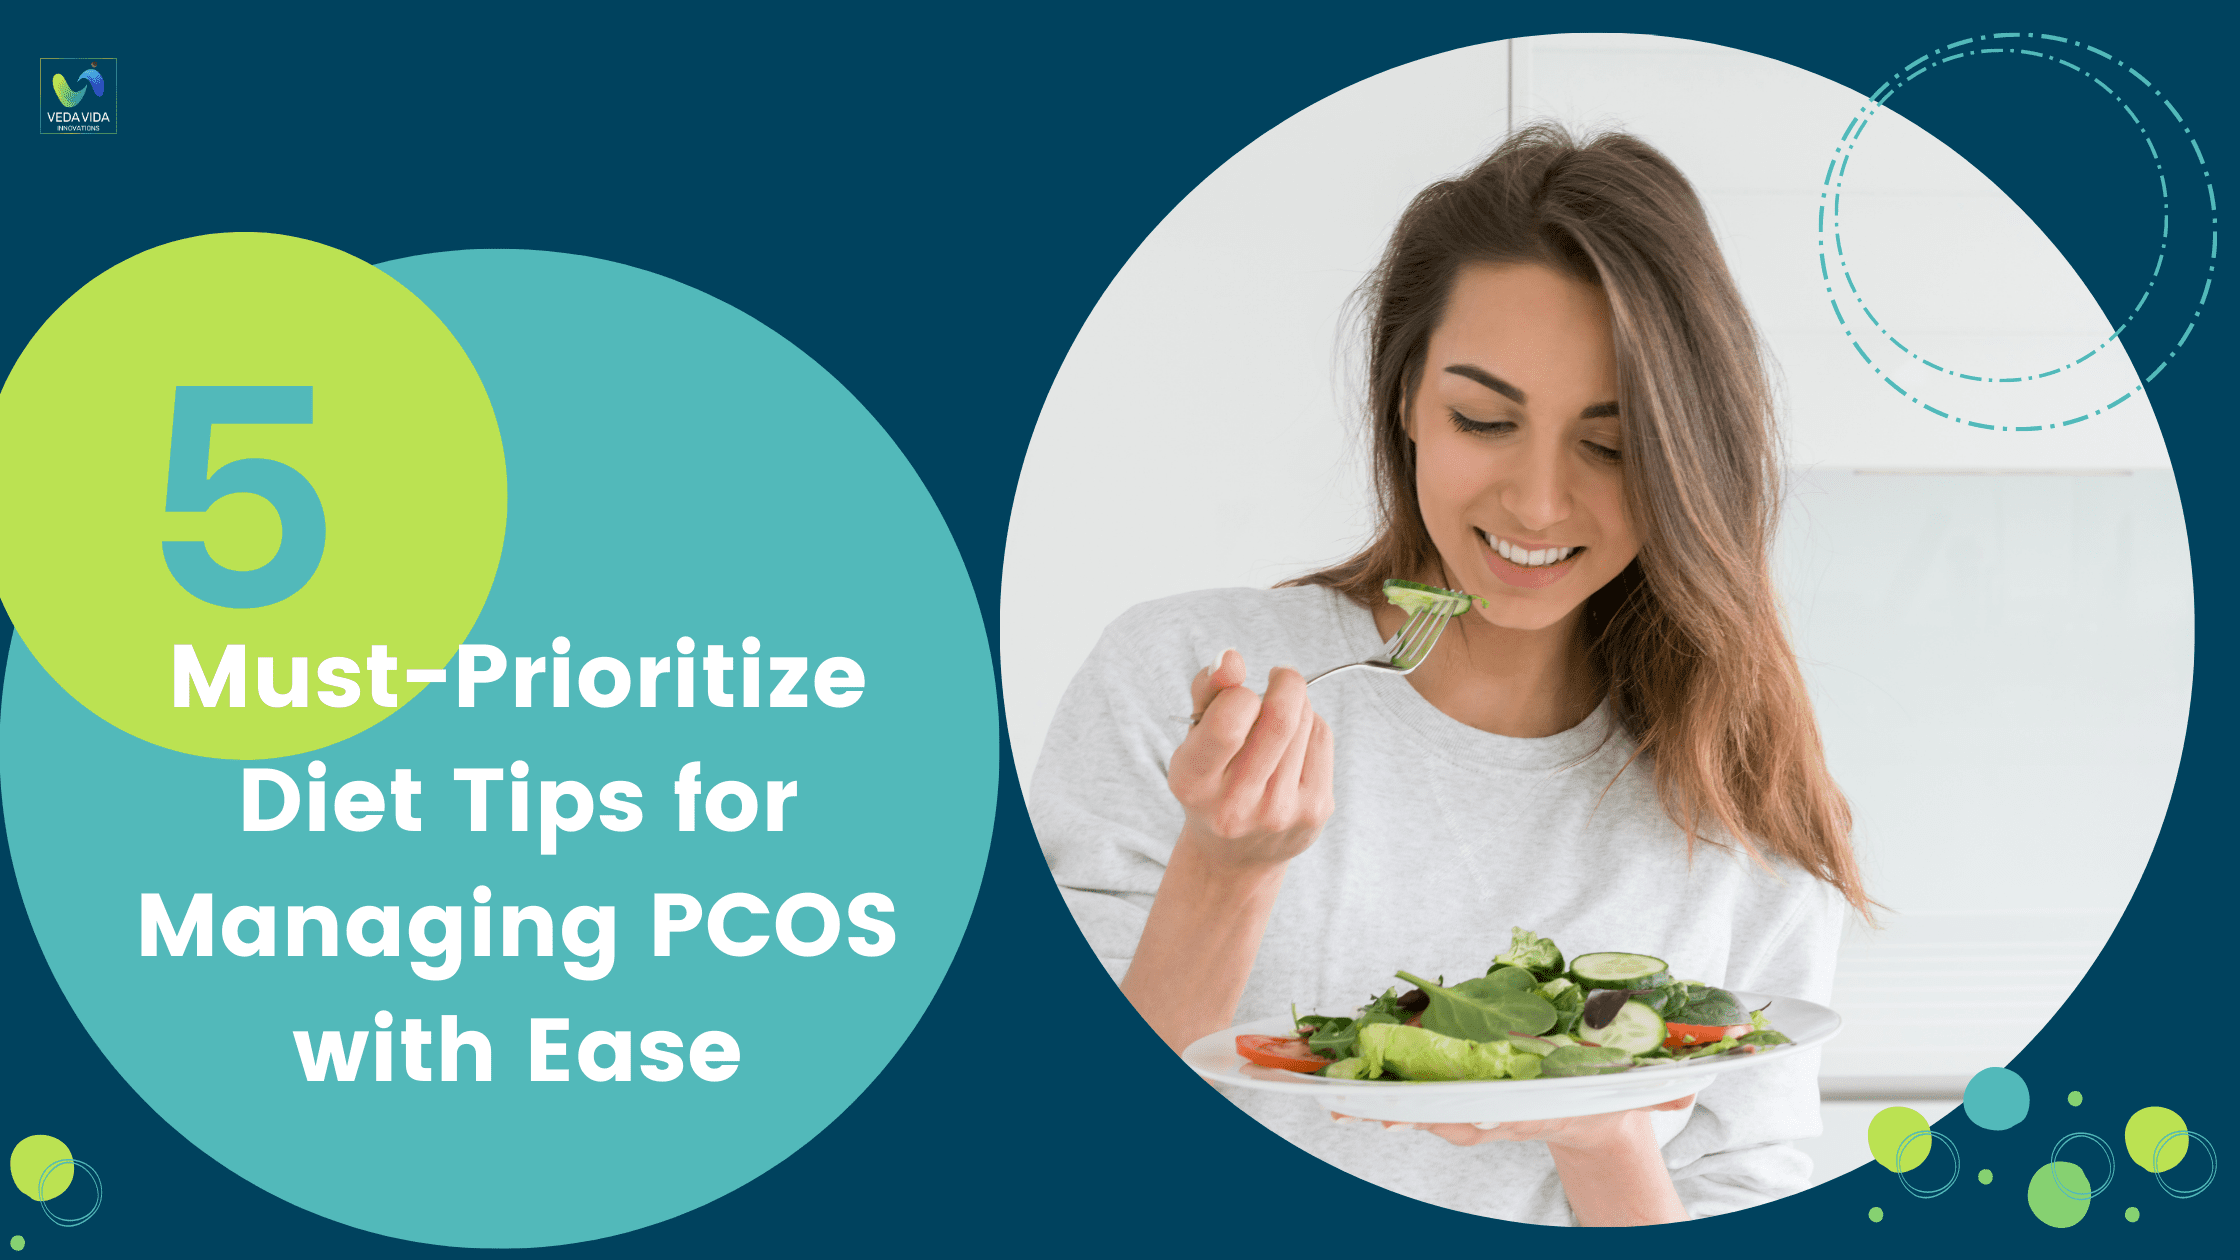 Veda VIda FemaleHealth1 5 Must Prioritize Diet Tips for Managing PCOS with Ease